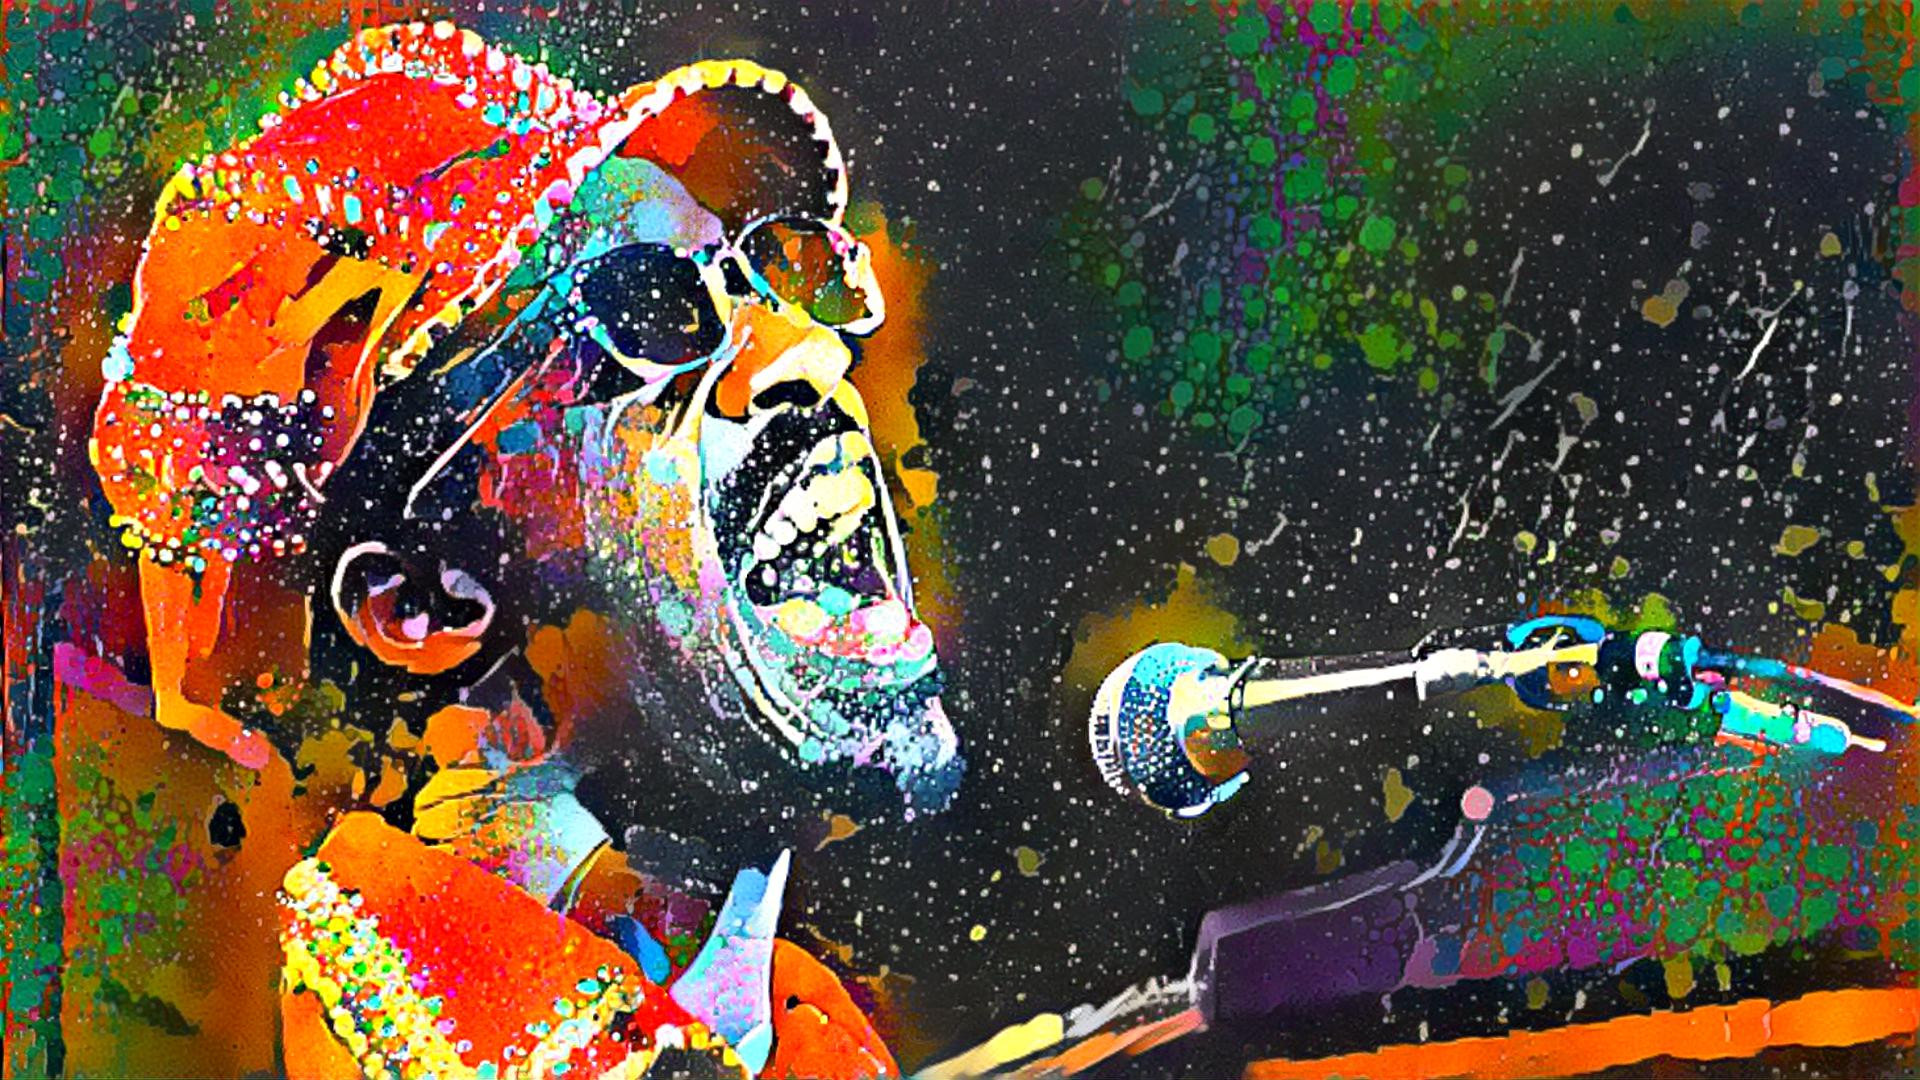 The one and only brilliant Stevie Wonder